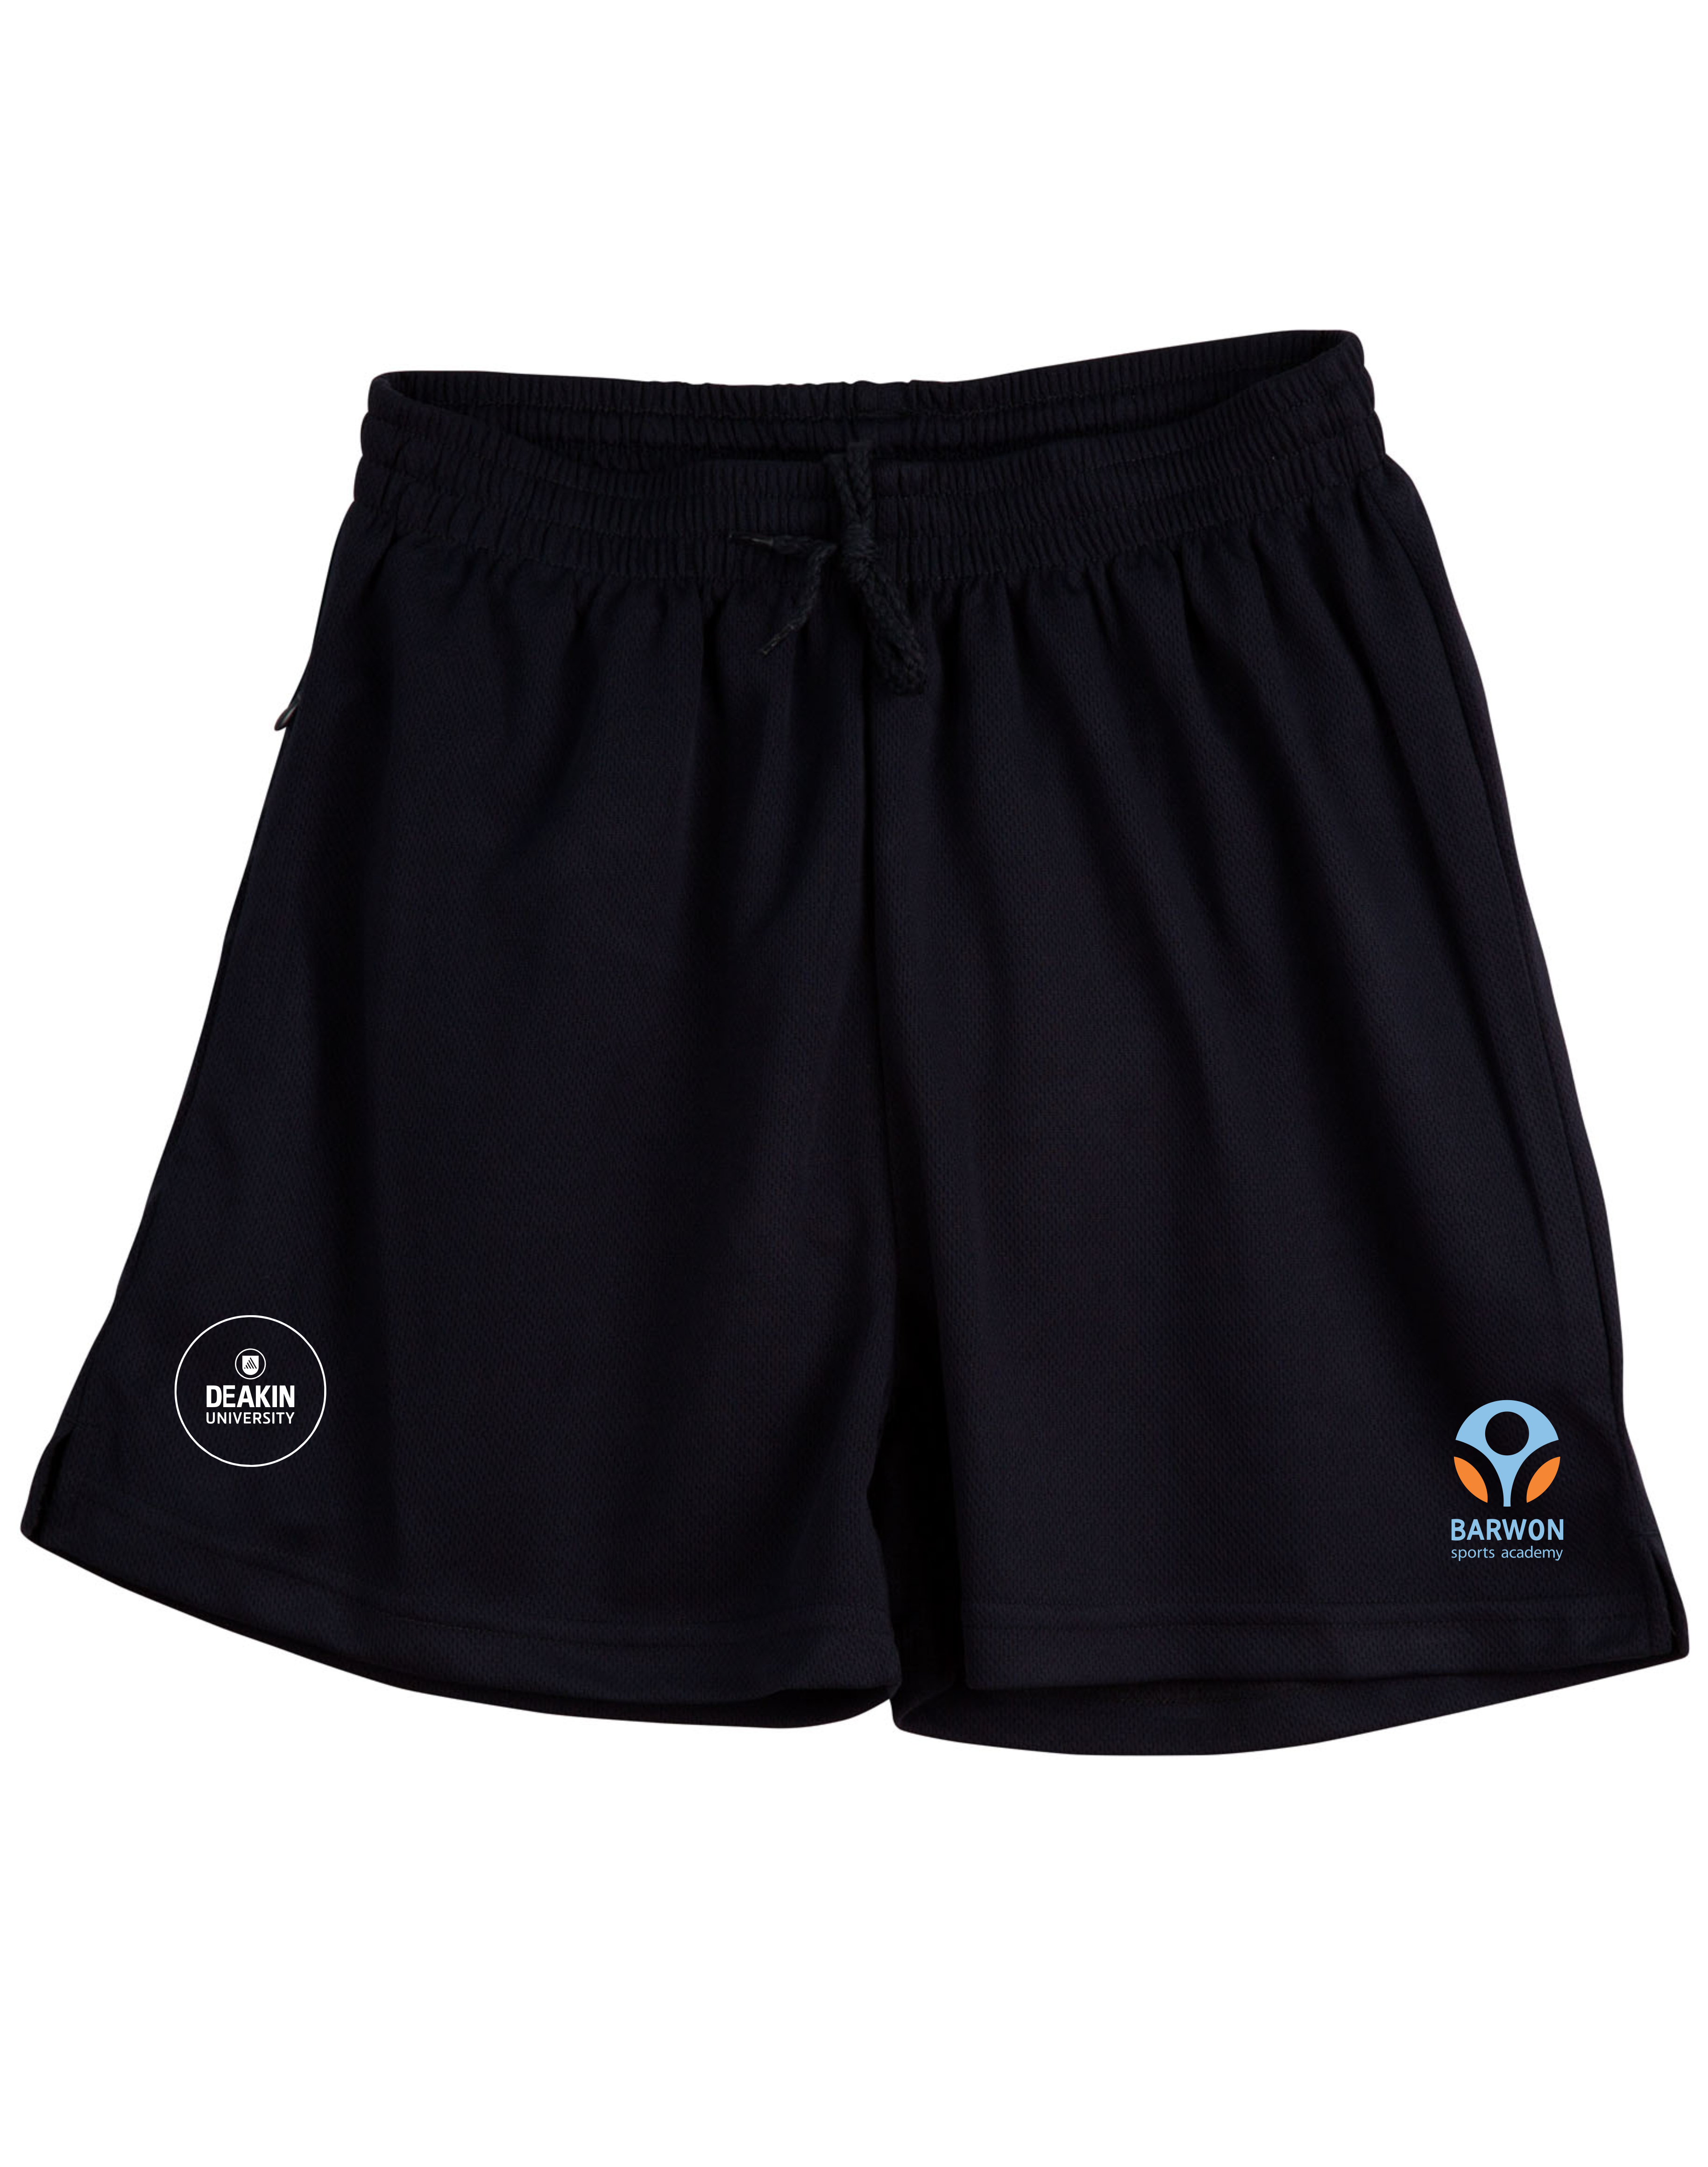 ***Discontinued Academy Men’s Shorts ***RUN OUT SALE***